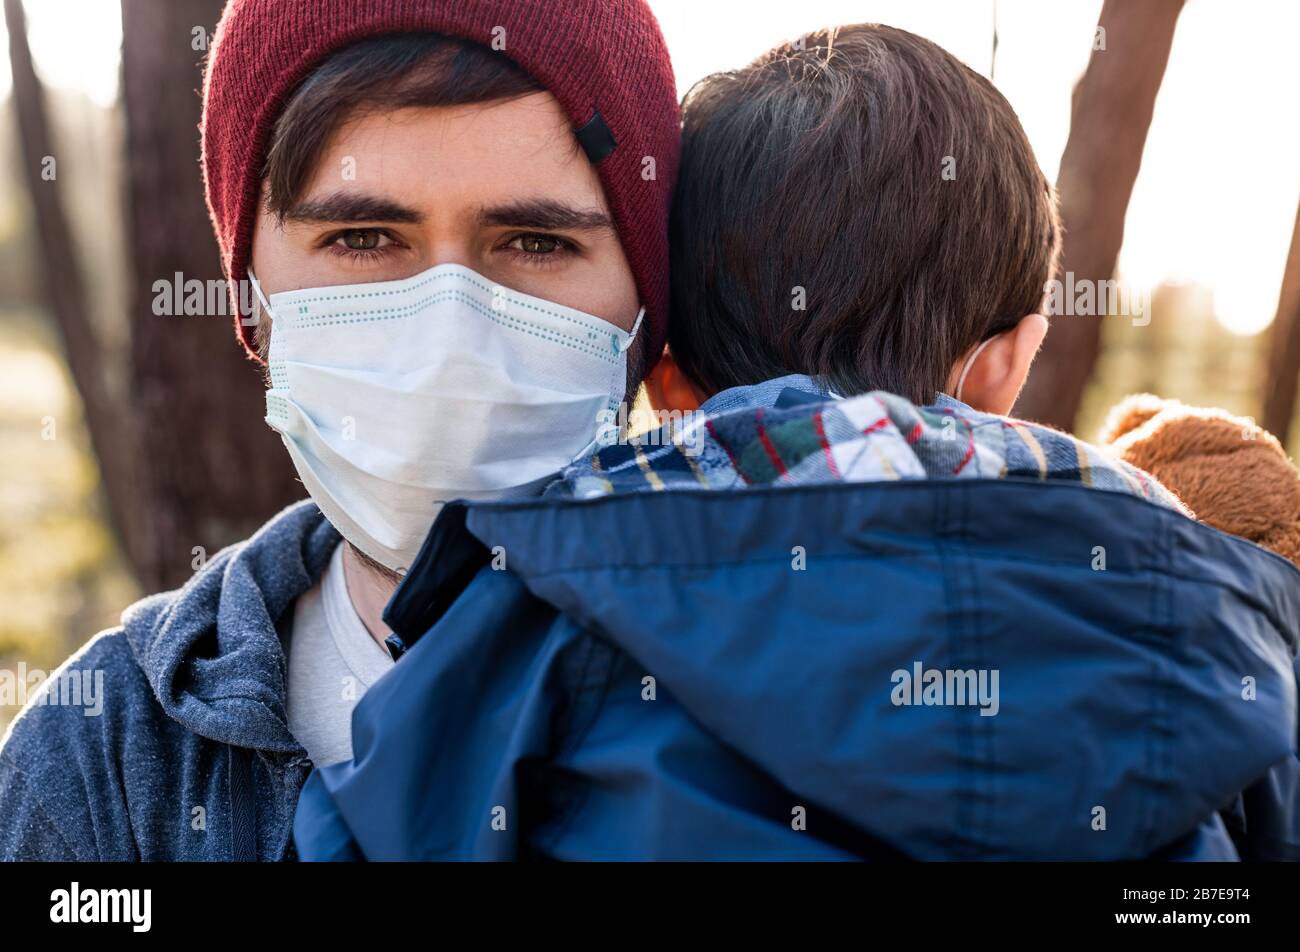 Concerned father and son using air protection masks Stock Photo